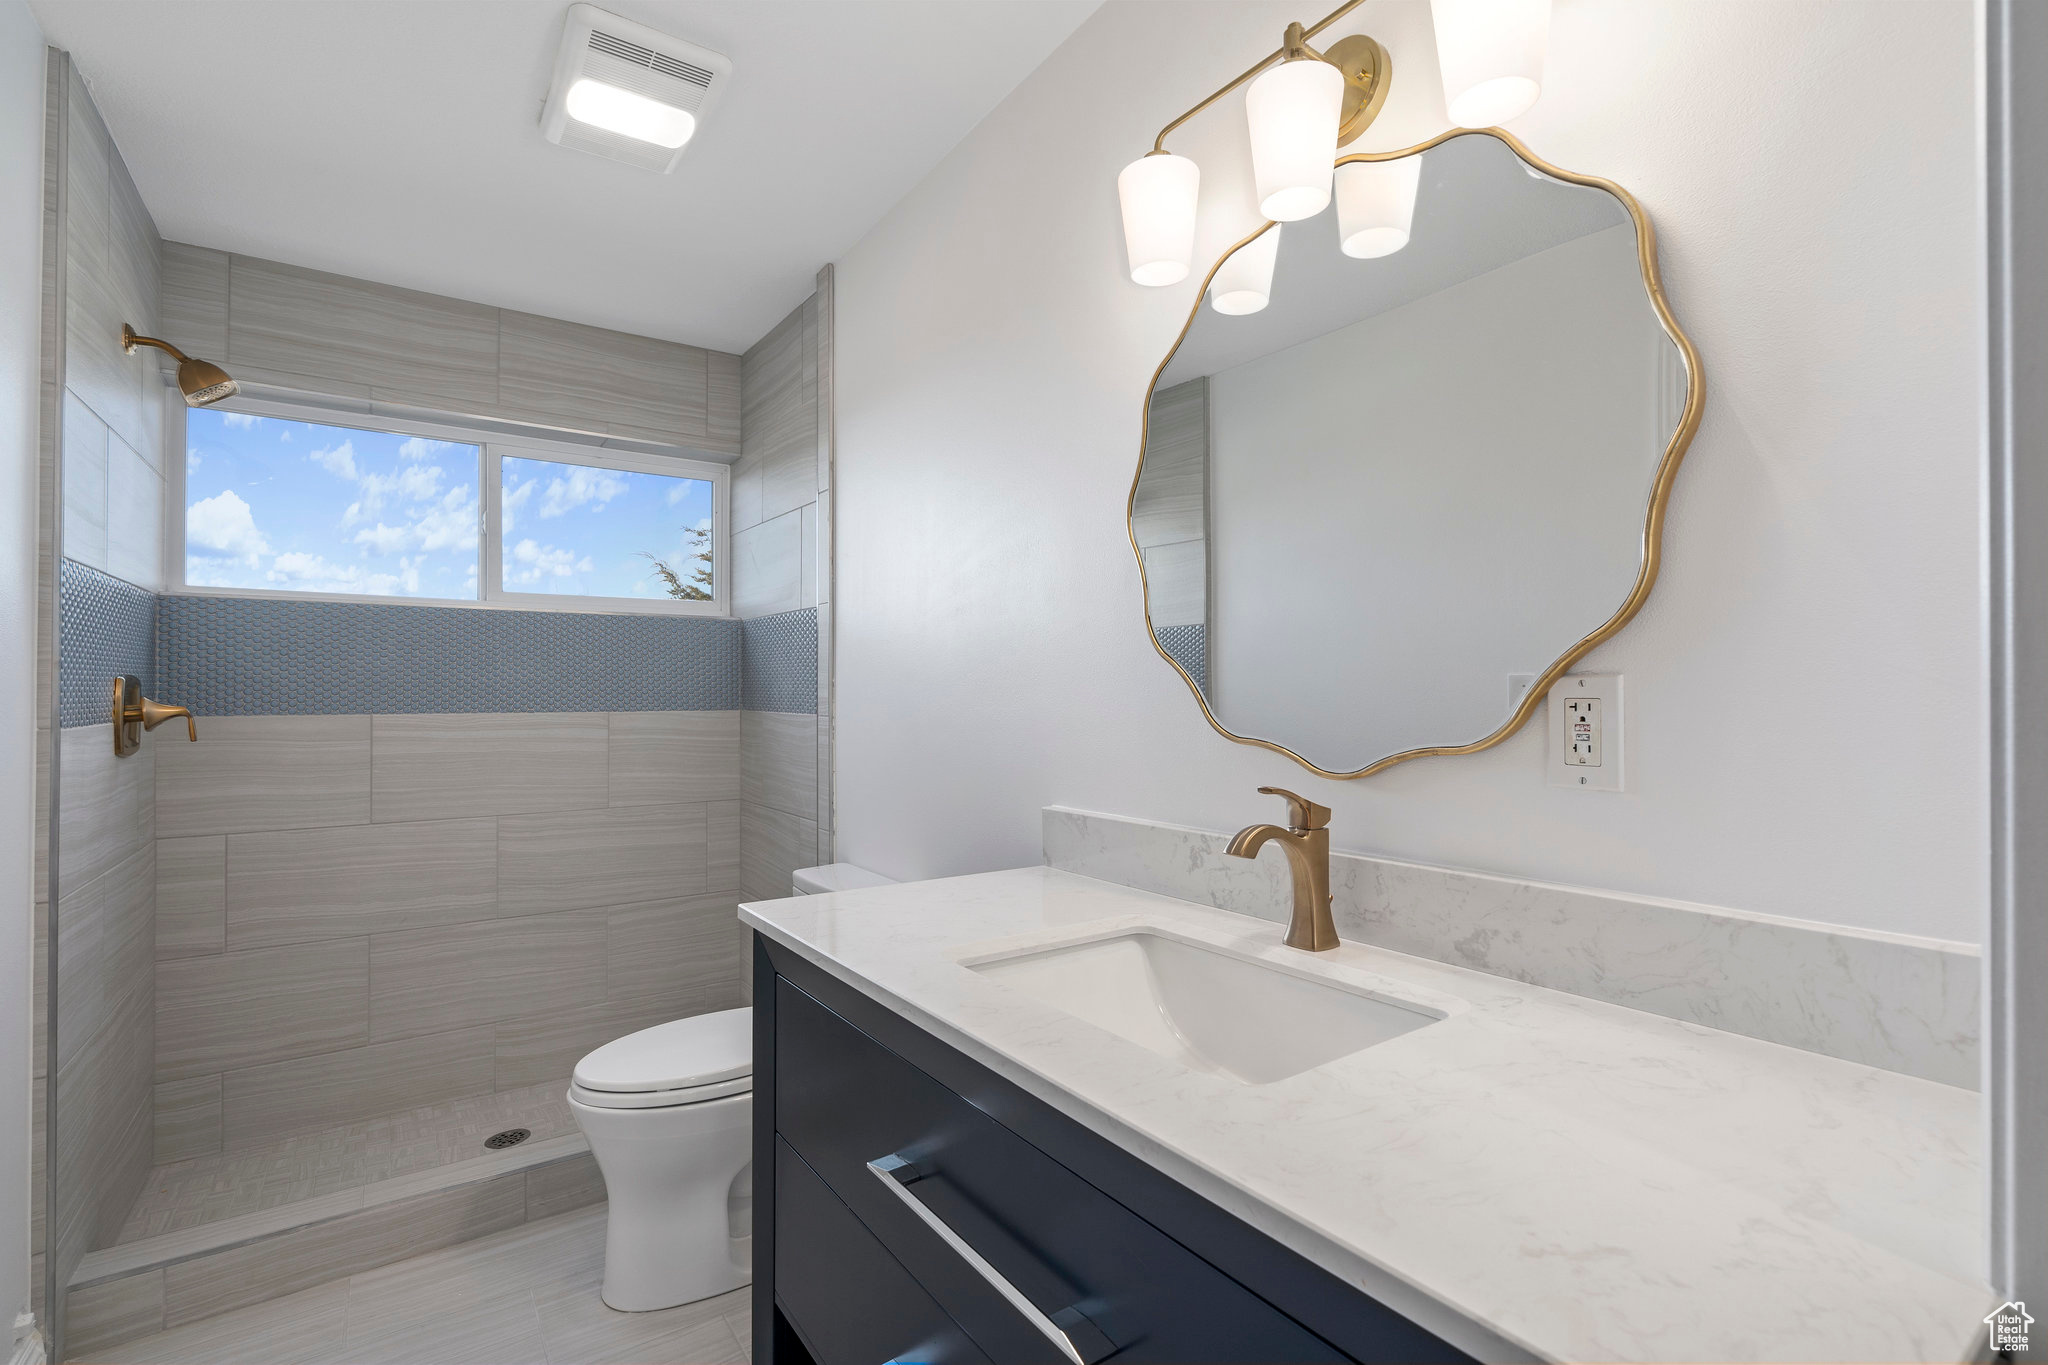 Basement bathroom with a tile shower, toilet, and vanity with extensive cabinet space